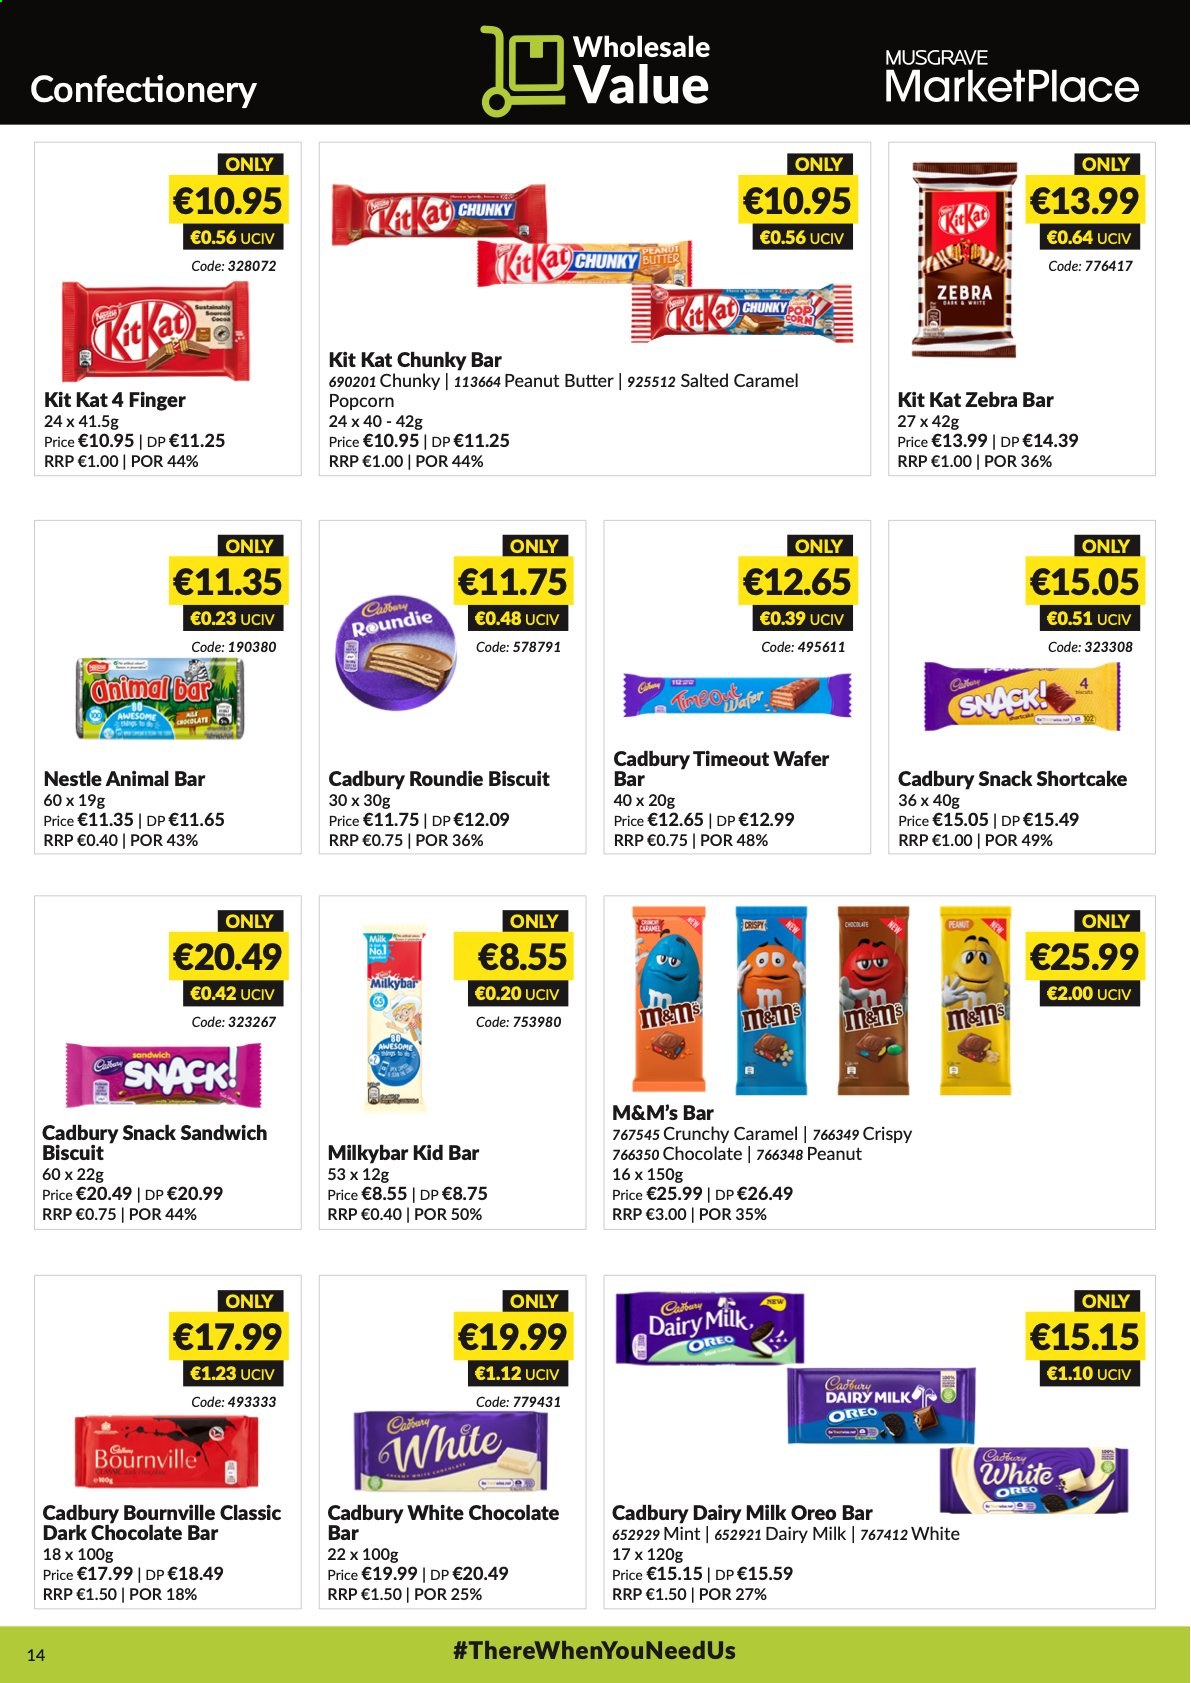 thumbnail - MUSGRAVE Market Place offer  - 29.08.2021 - 25.09.2021 - Sales products - sandwich, Oreo, Nestlé, wafers, white chocolate, snack, M&M's, KitKat, biscuit, dark chocolate, Cadbury, Milkybar, Dairy Milk, chocolate bar, popcorn, peanut butter. Page 14.